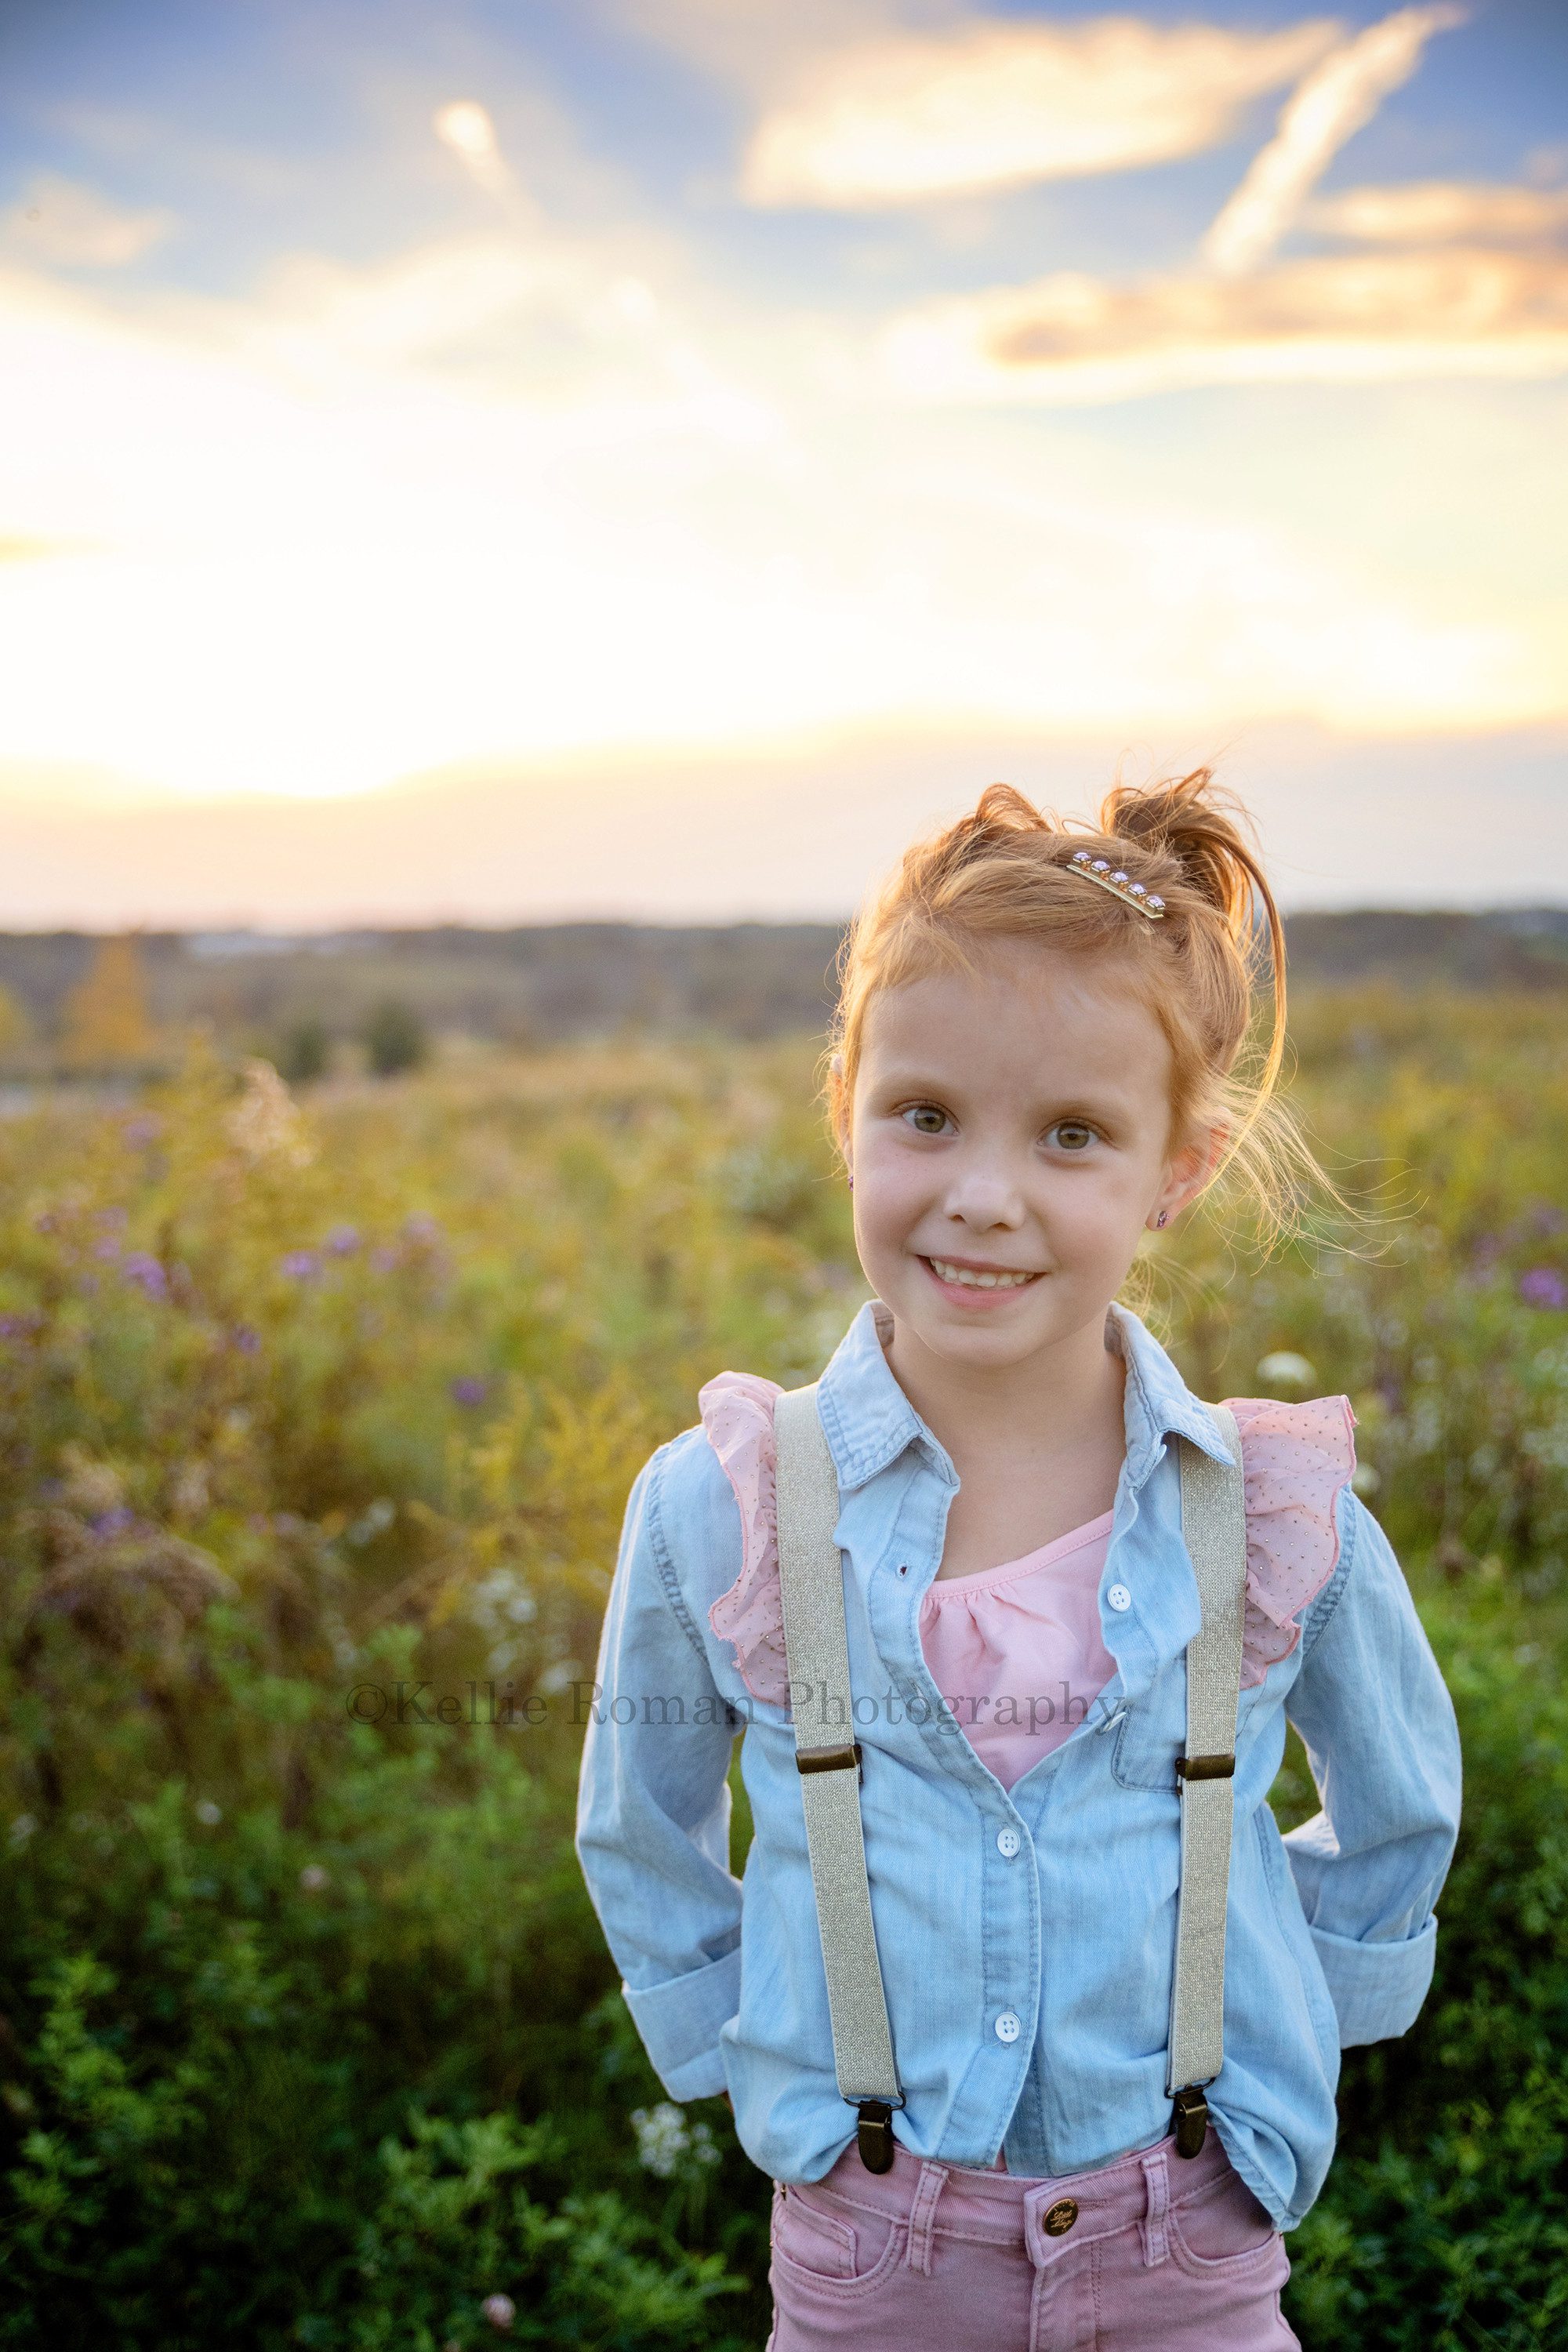 sunset milestone a young girl in milwaukee county Wisconsin is in a field of tall green grass with a bright colorful sunset behind her she's wearing pink jeans with a pink take top under a blue denim shirt she has on pink and gold suspenders she has red hair and it's in a messy pony tail